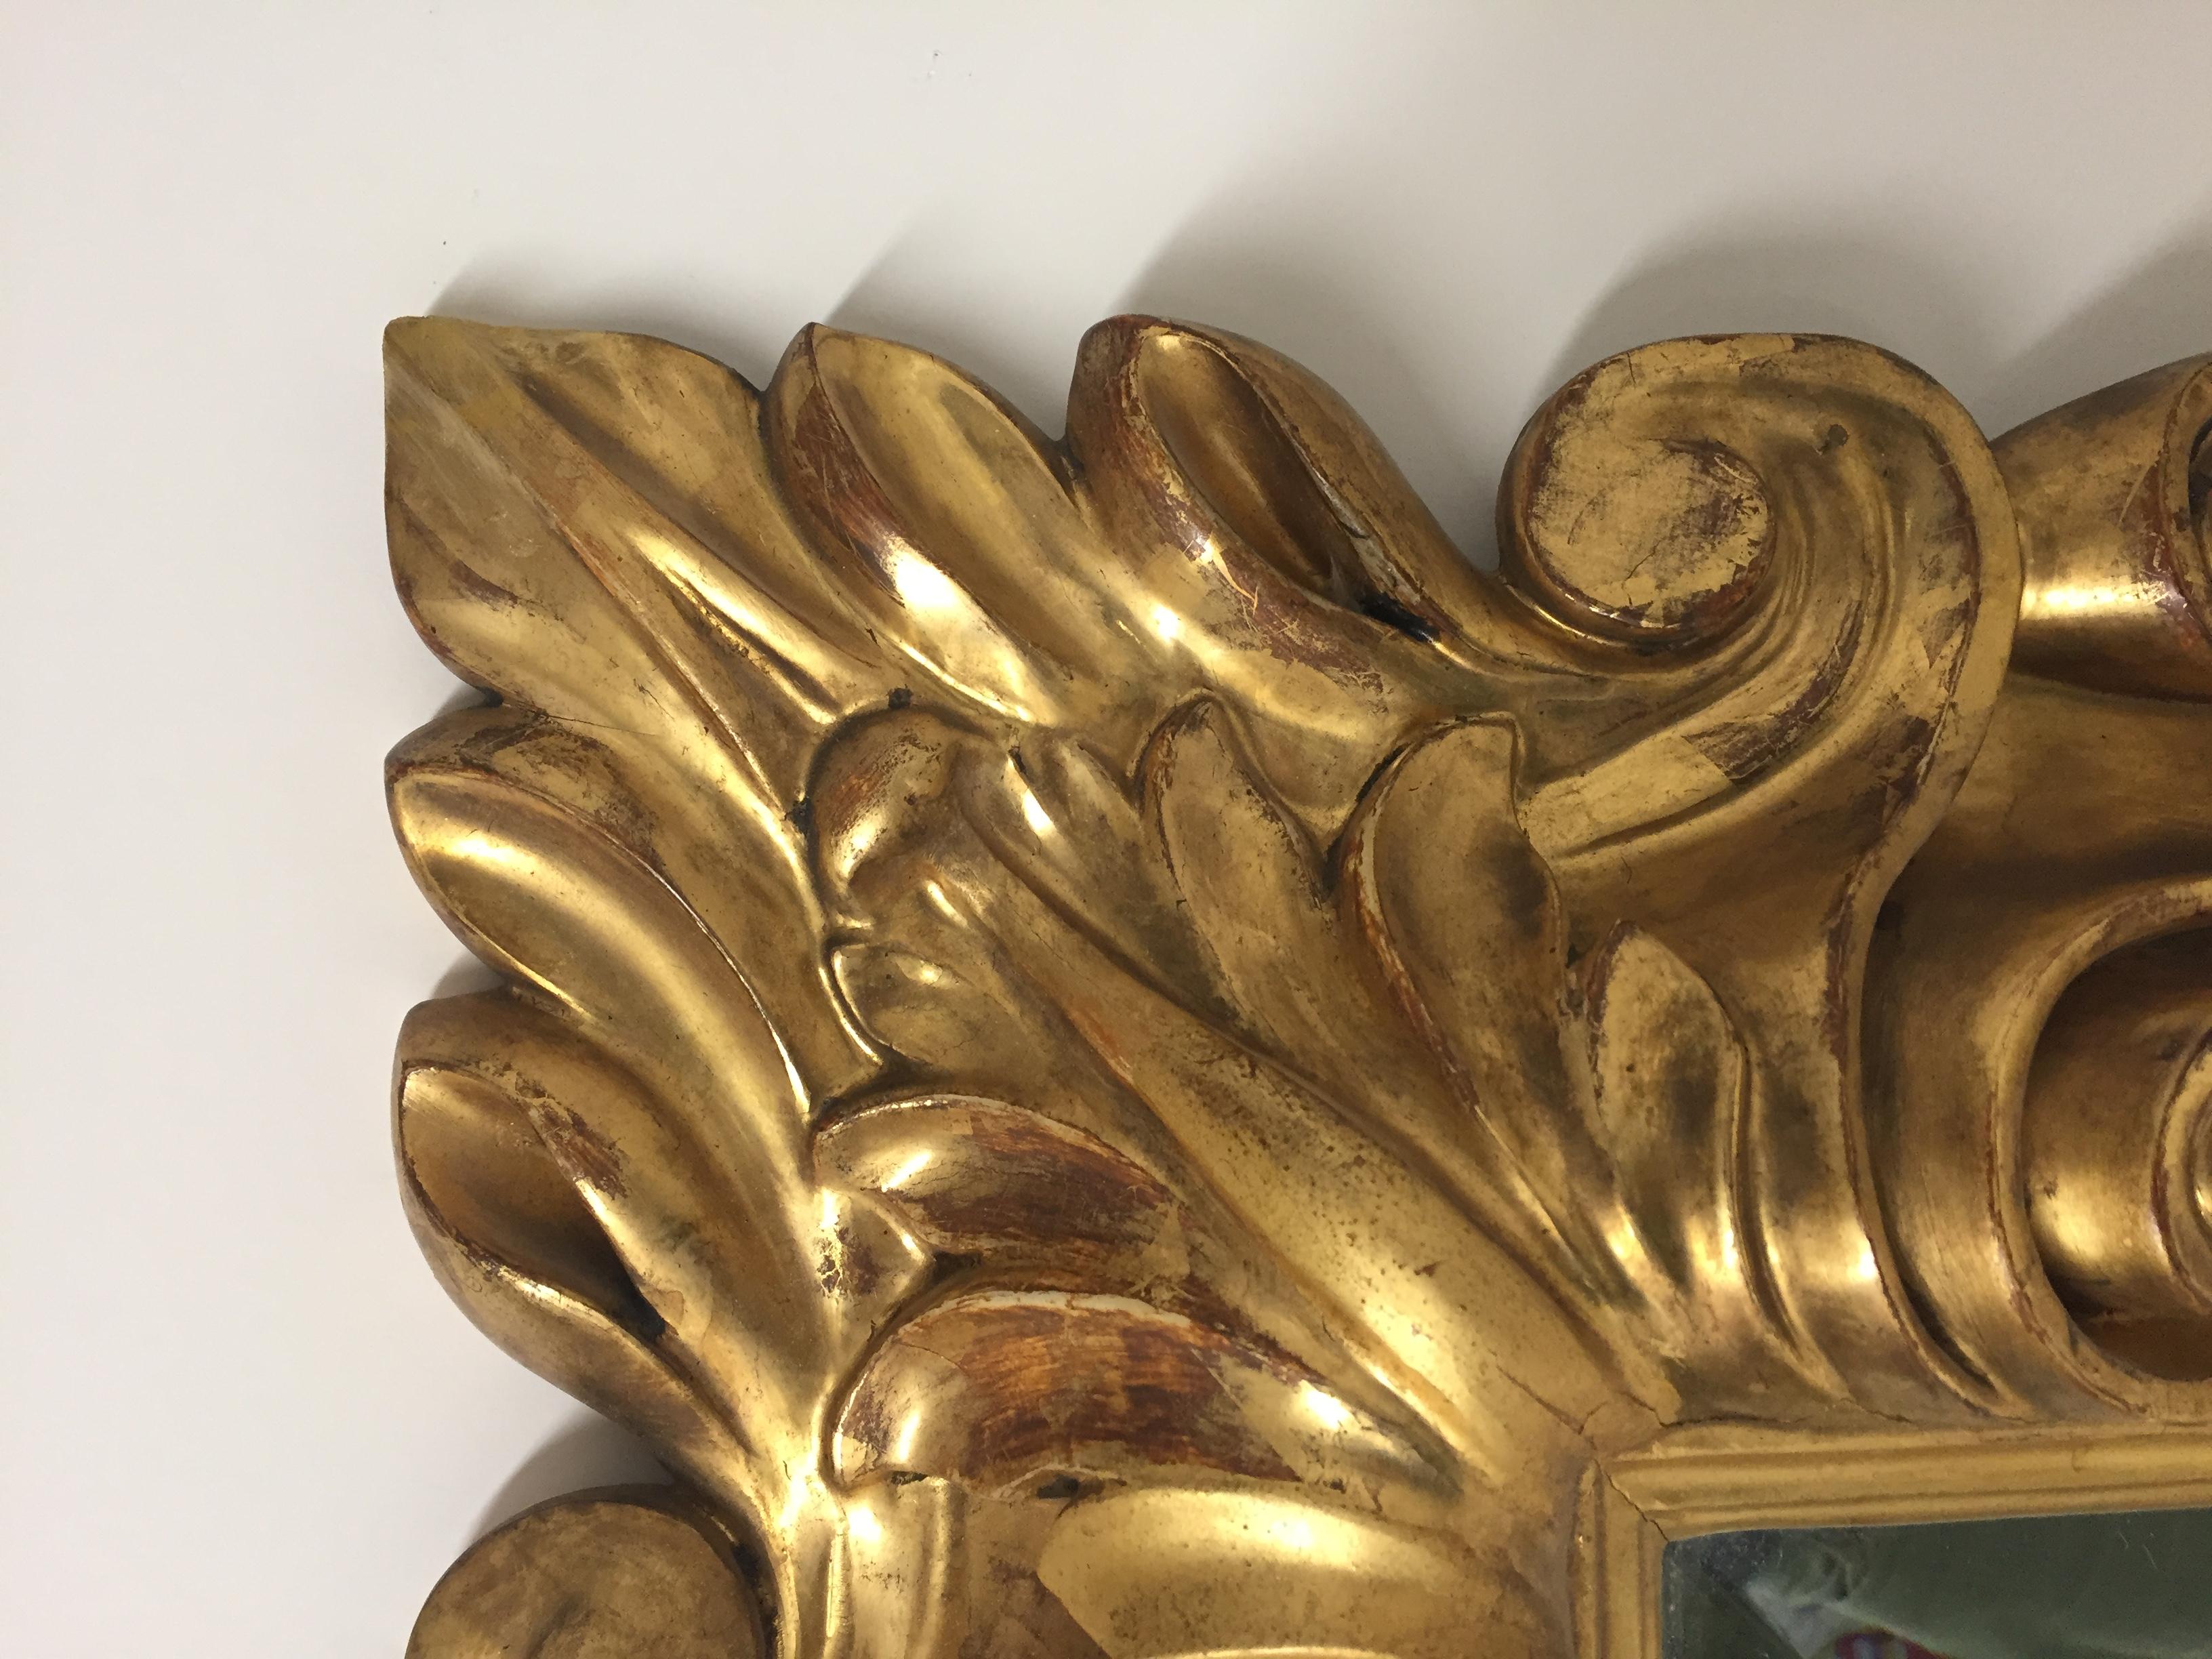 A beautiful Italian elaborately carved gilt wood mirror with 22-carat gold leaf having swirls and curlicues that are fabulous.